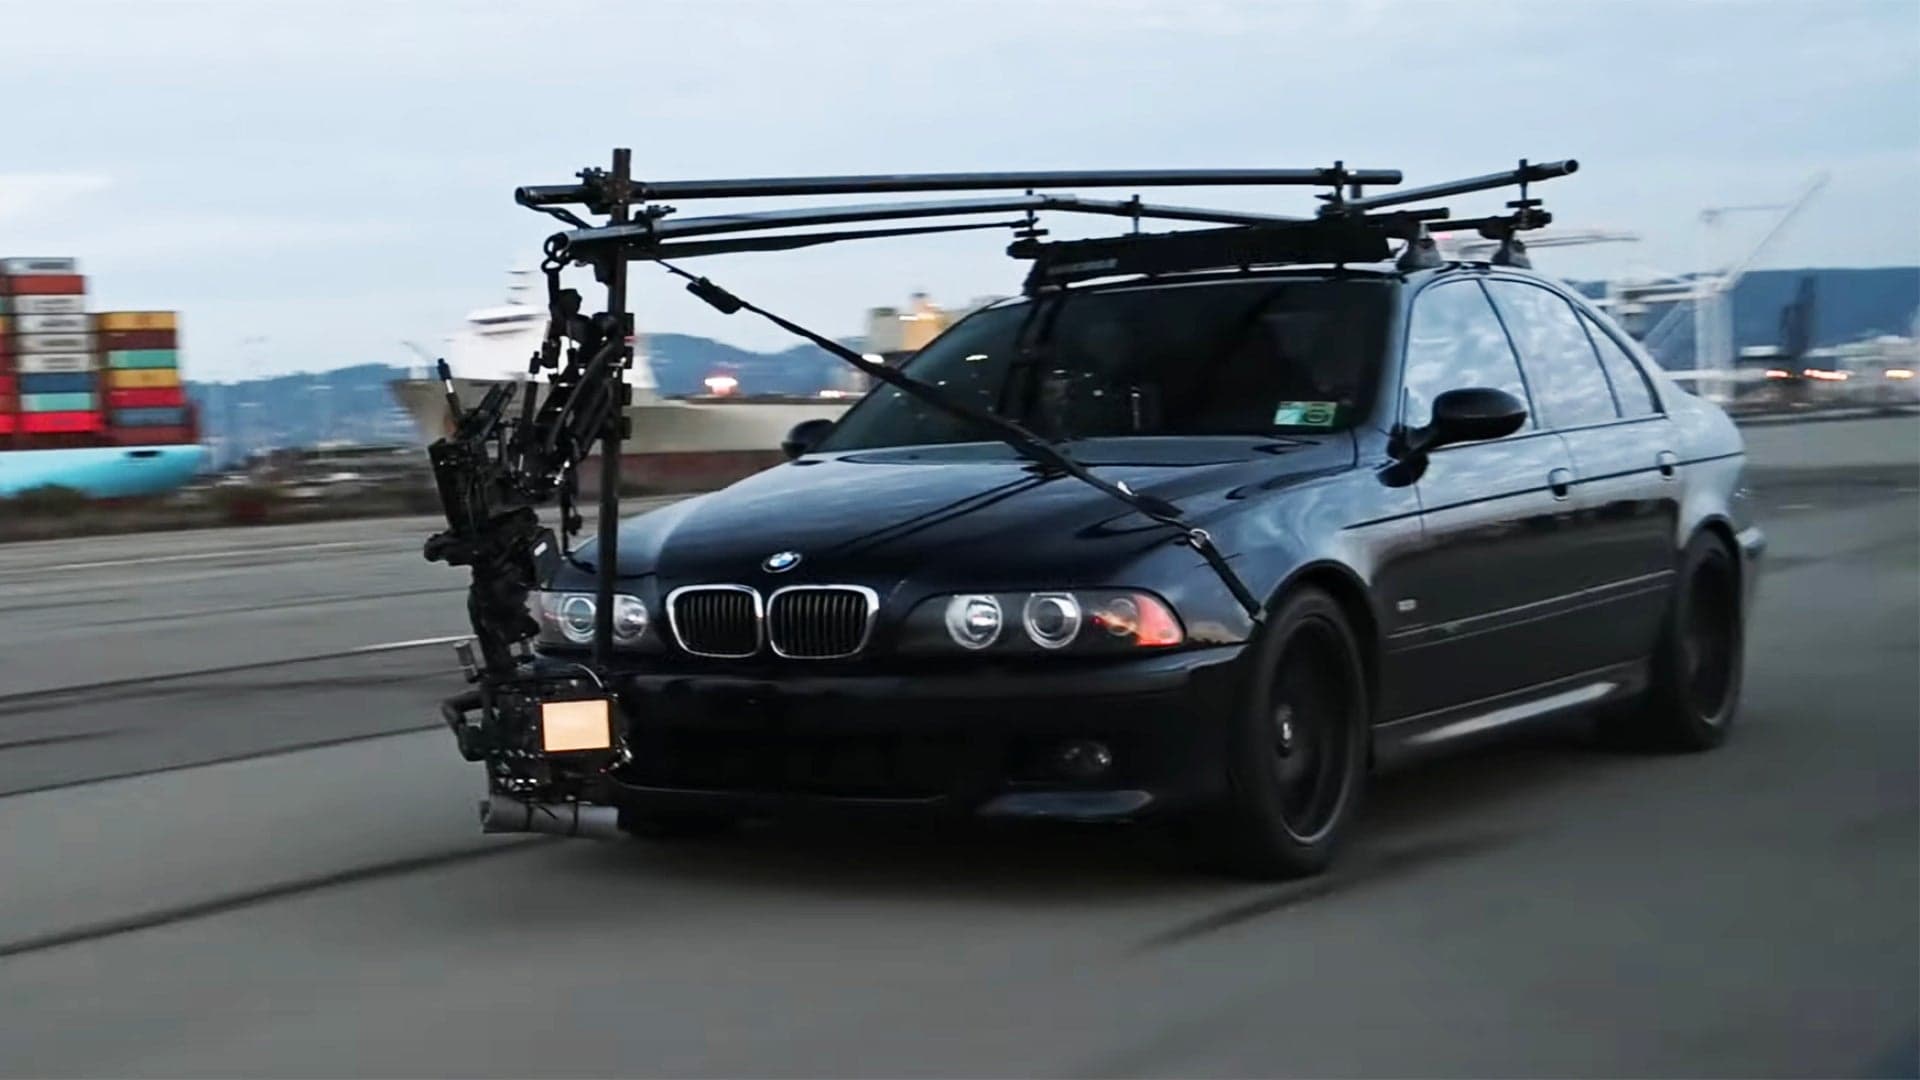 Meet the 200,000-Mile BMW M5 Camera Car Built to Chase Ferraris